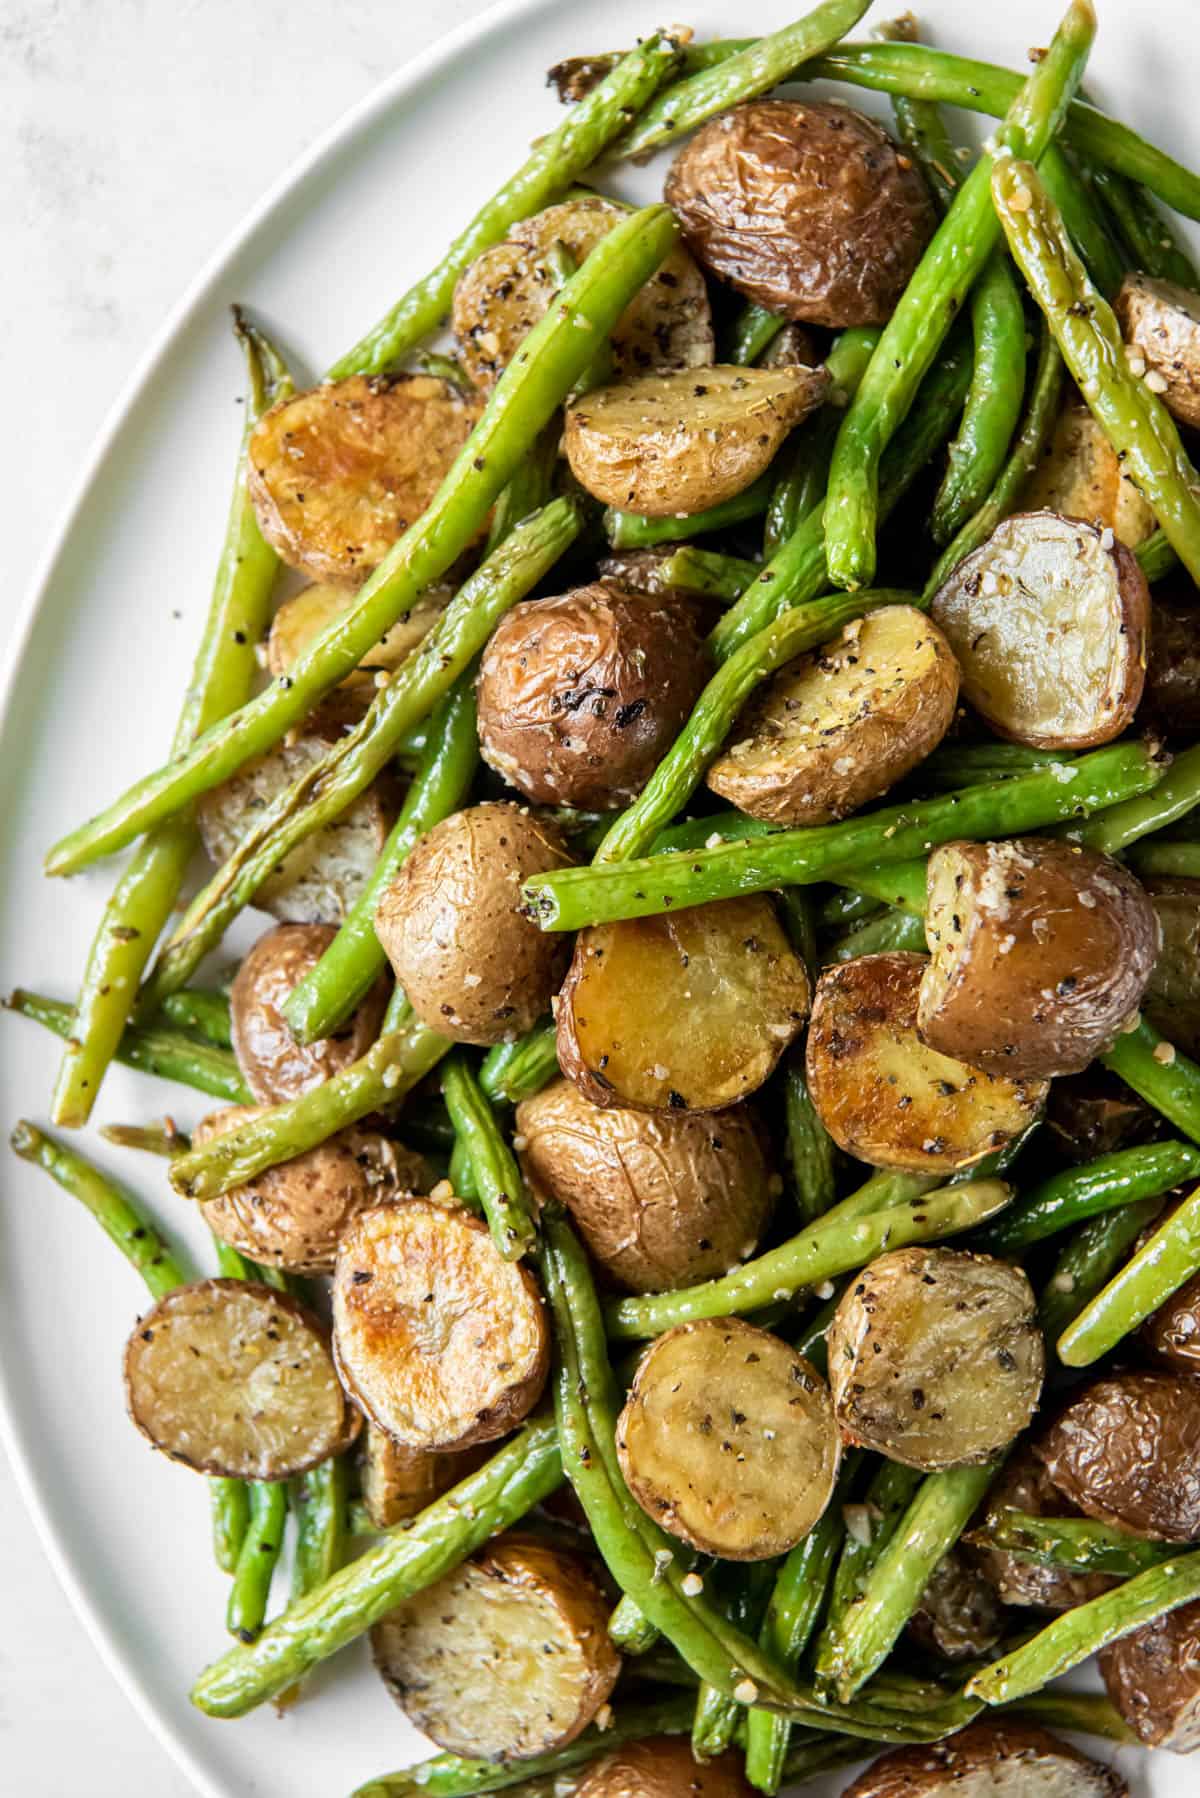 Roasted green beans and potatoes on a white plate ready for serving.